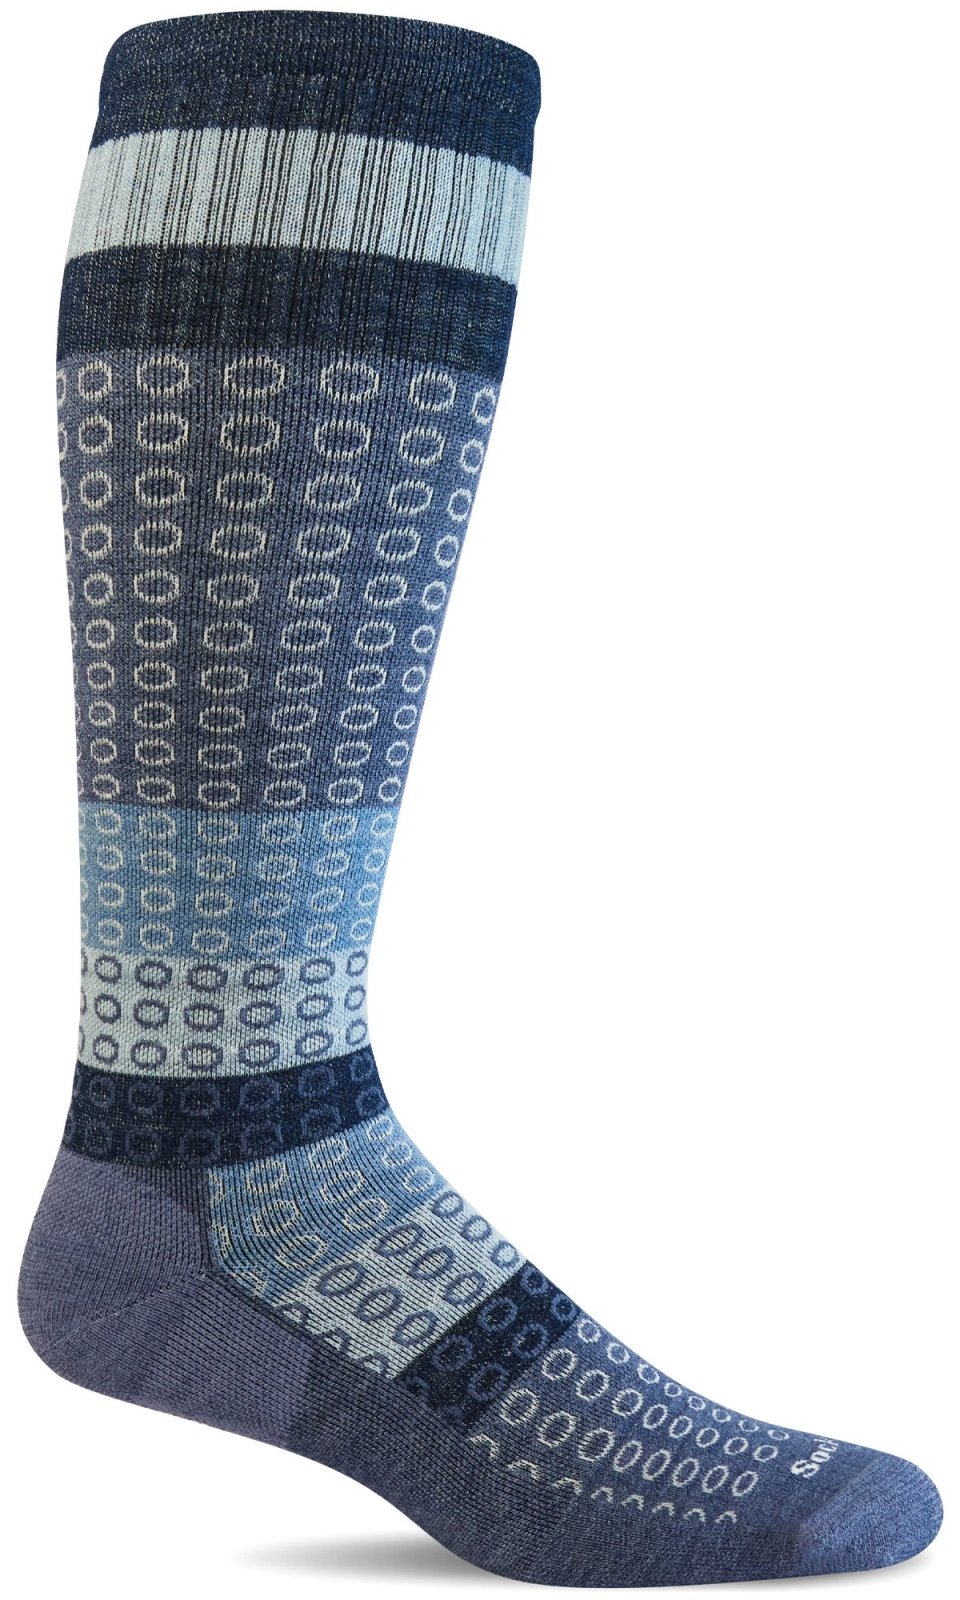 Women's Full Circle | Moderate Graduated Compression Socks | Wide Calf Fit - Merino Wool Lifestyle Compression - Sockwell